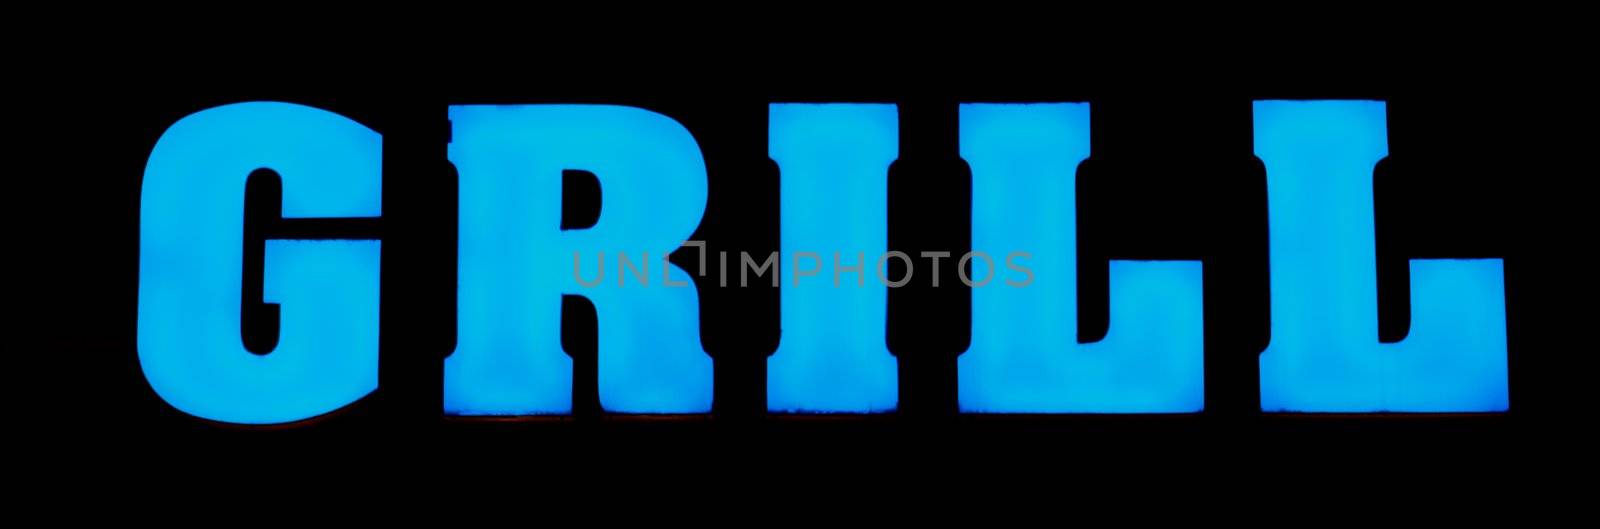 A blue neon "GRILL" sign over a black background